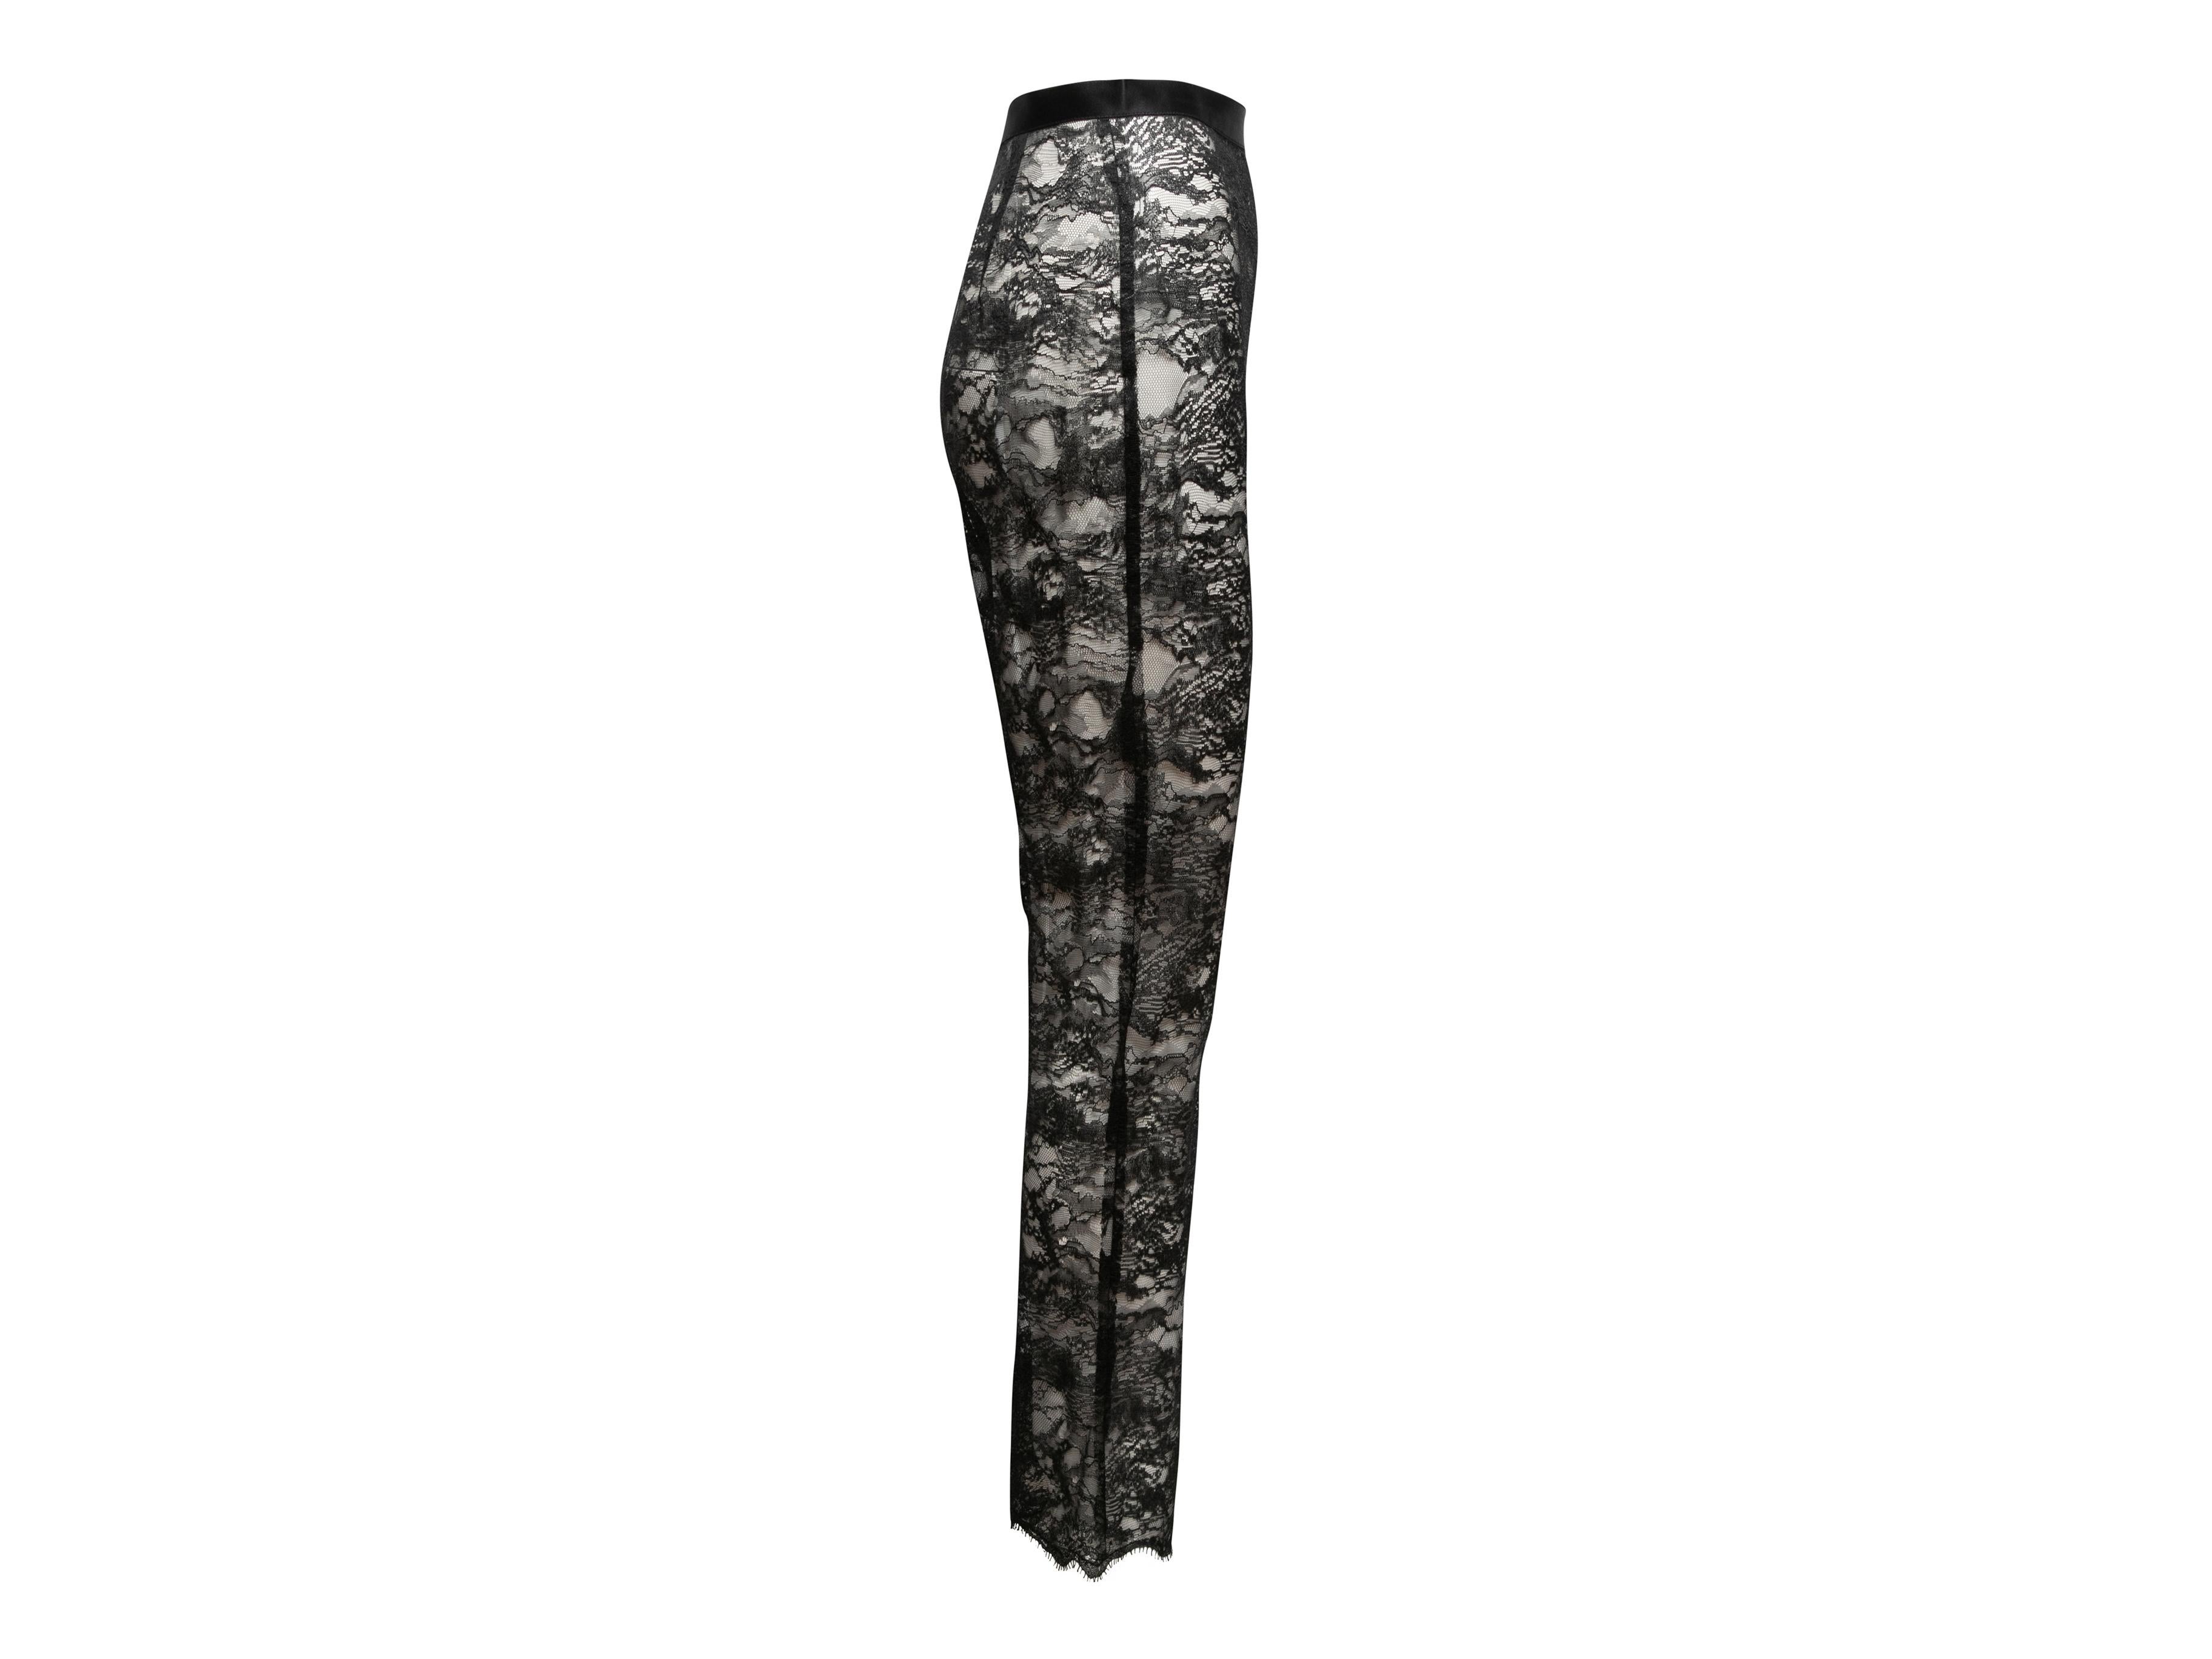 Black sheer high-rise lace pants by Chanel. Satin trim at waist. Zip closure at side. 25